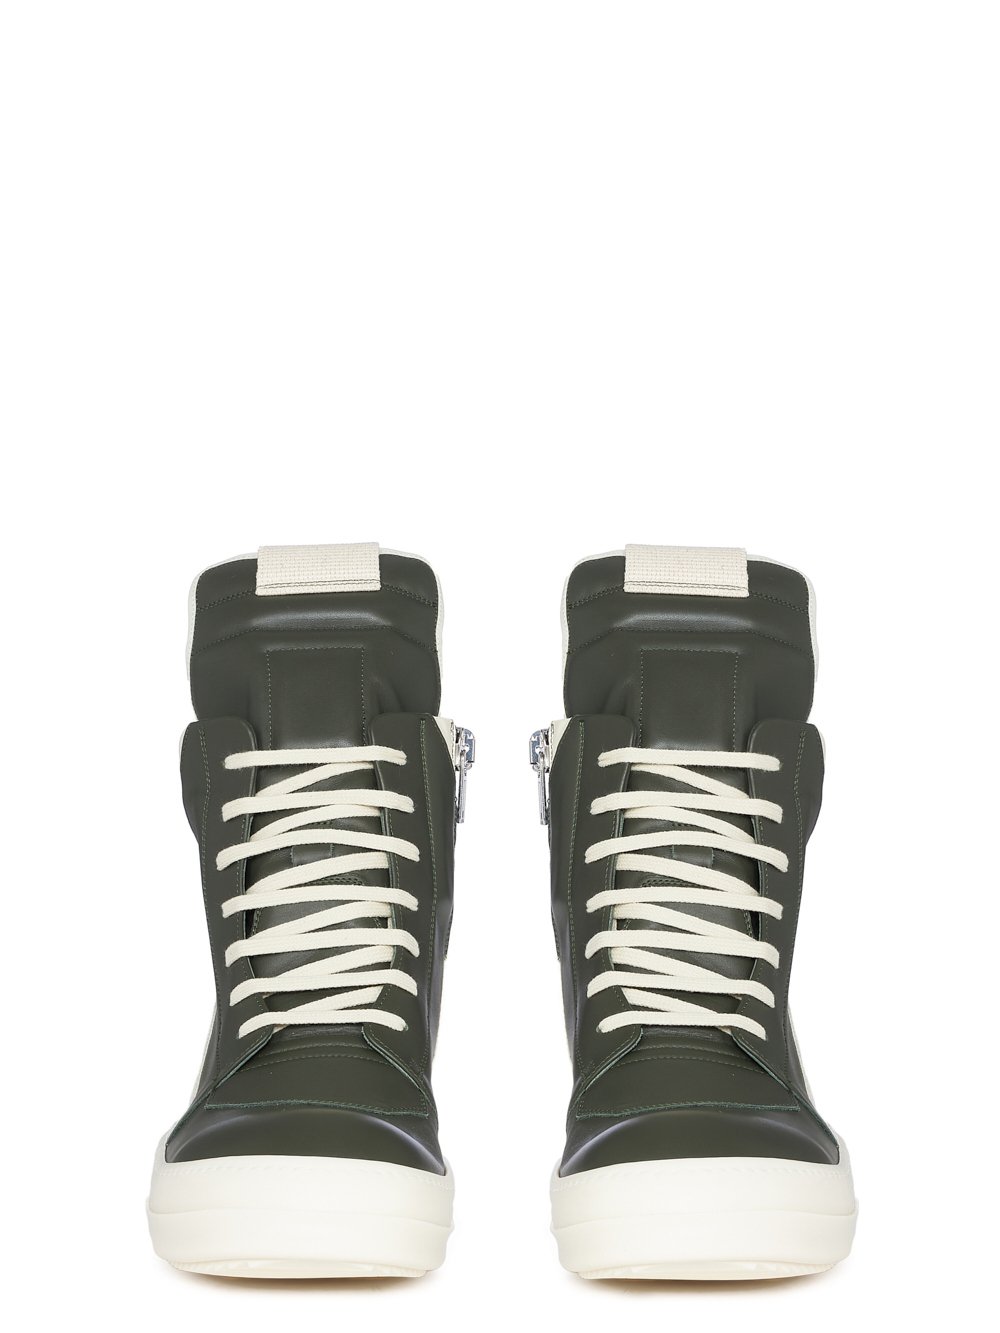 RICK OWENS FW23 LUXOR GEOBASKET IN FOREST CORTINA GREASE CALF LEATHER AND FULL GRAIN CALF LEATHER 